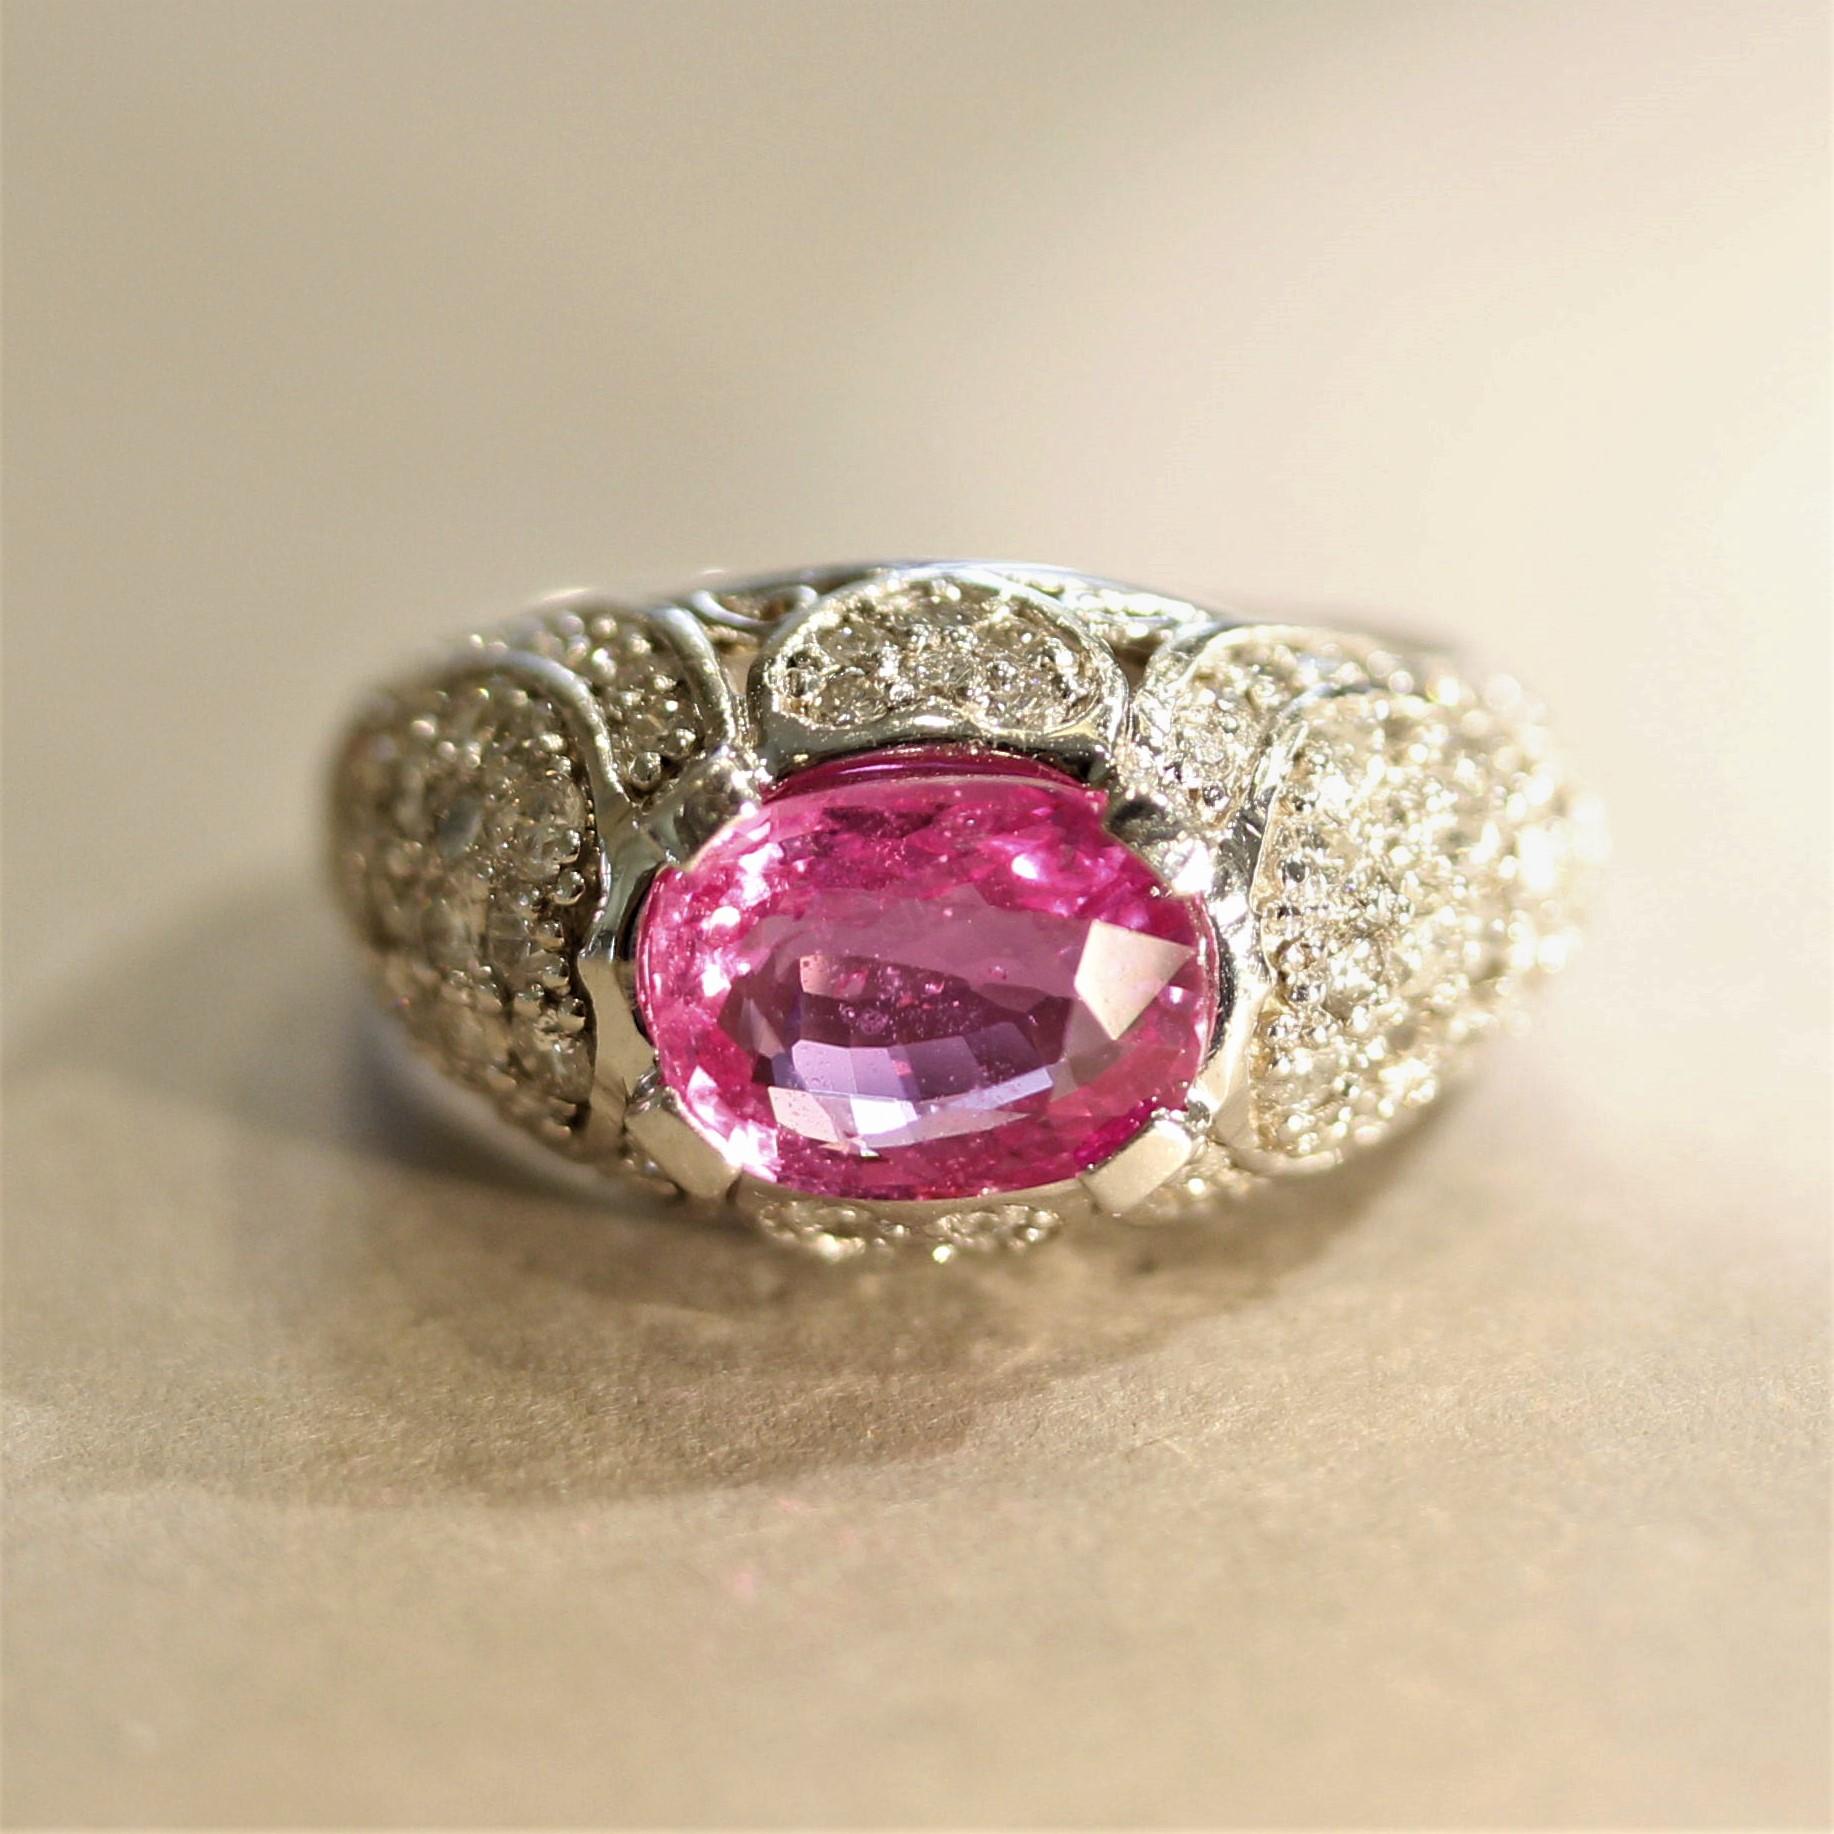 A very fine pink sapphire takes center stage! It weighs 3.02 carats and has a vivid hot-pink color with excellent brilliance and clarity. It is accented by 1.66 carats of round brilliant-cut diamonds which are set in the gallery of the ring which